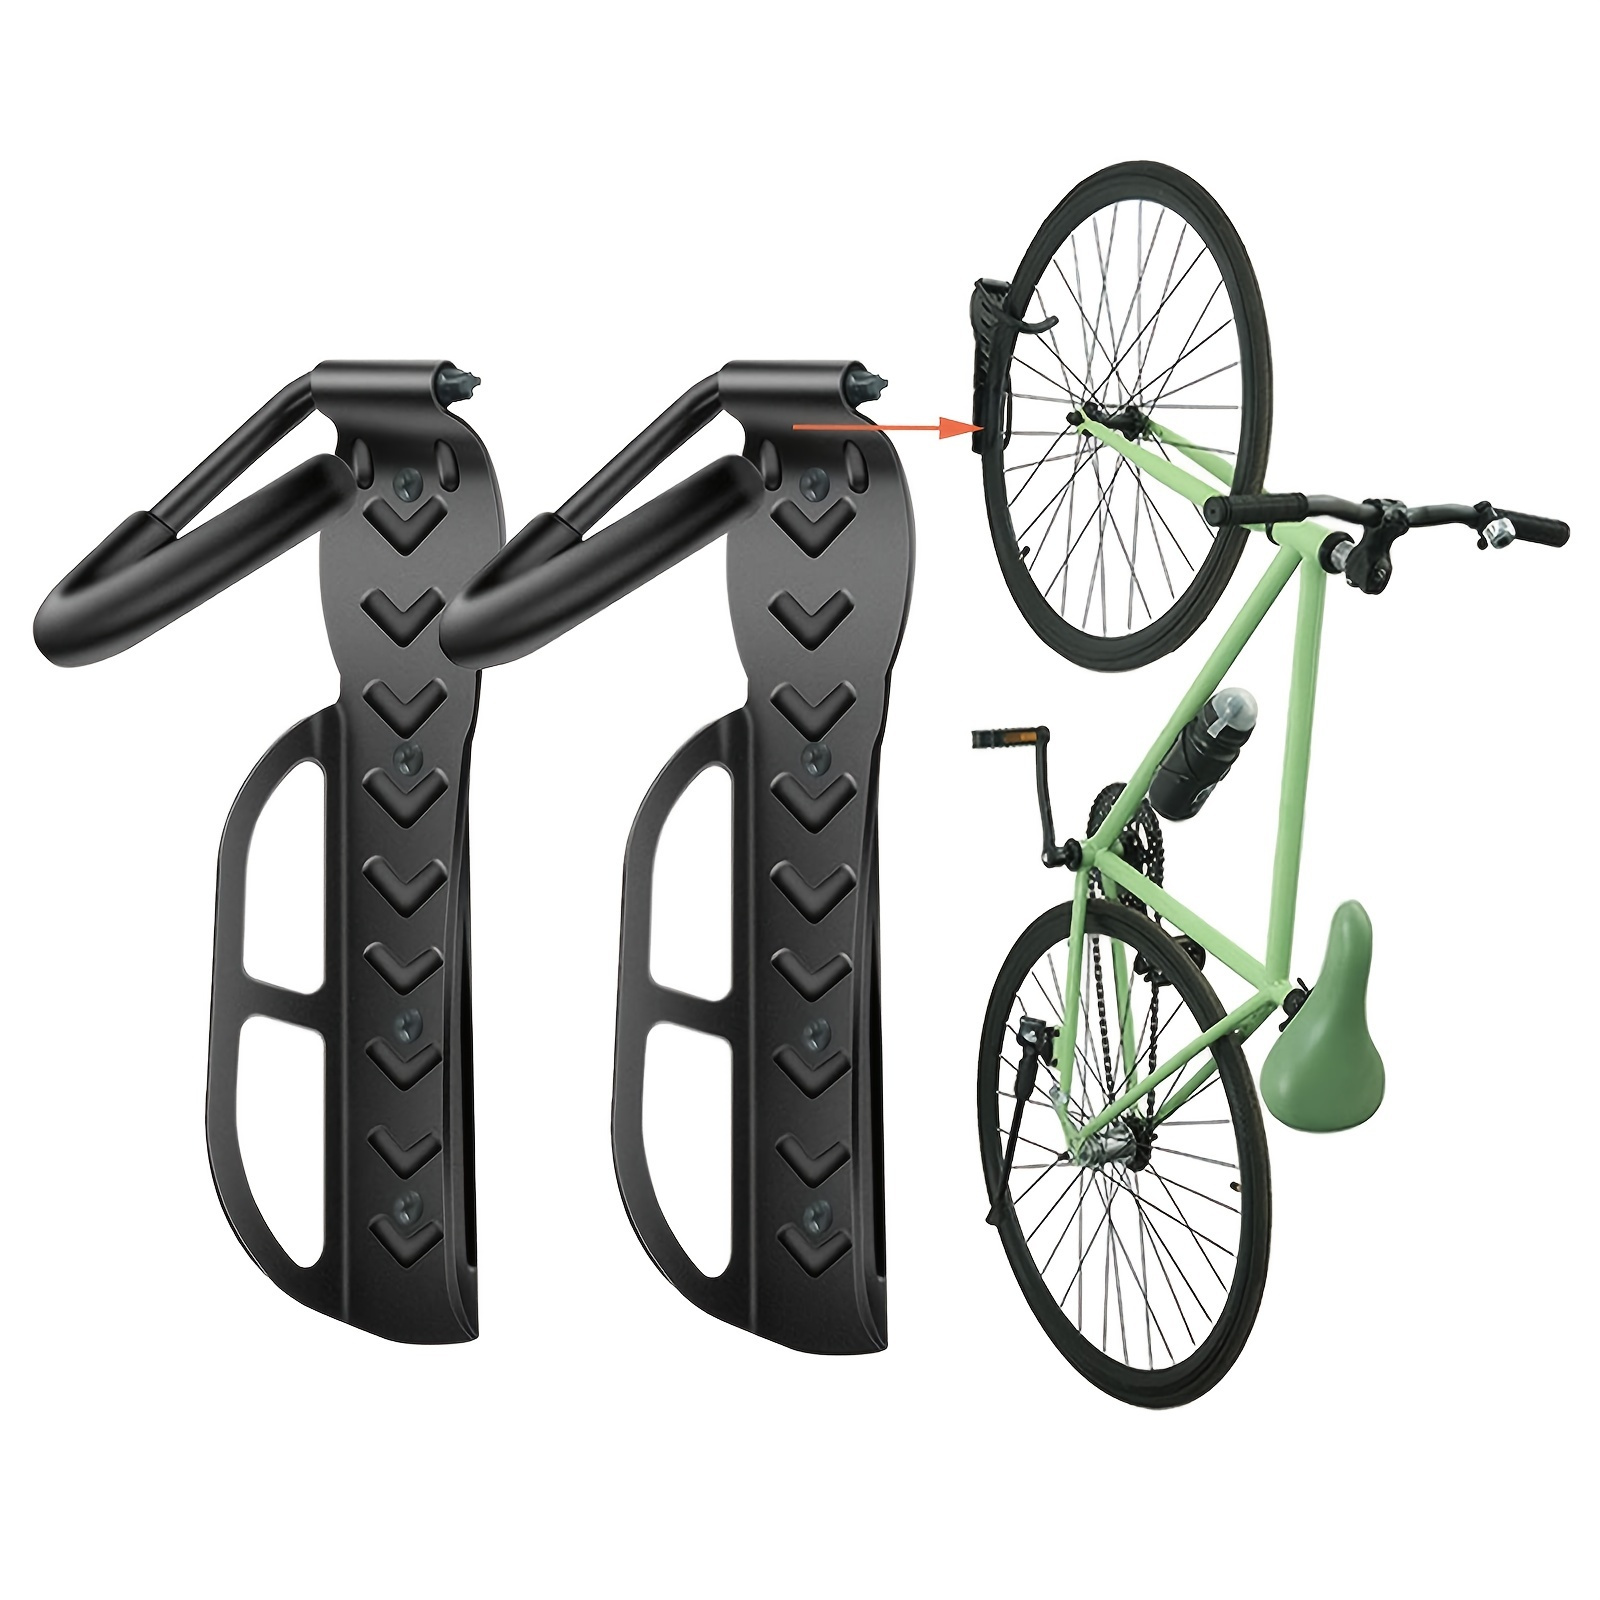 

65-lb Capacity Wall Mount Bike Rack: The Perfect Garage Storage System For Your Bikes - Easy To Hang & Detach!